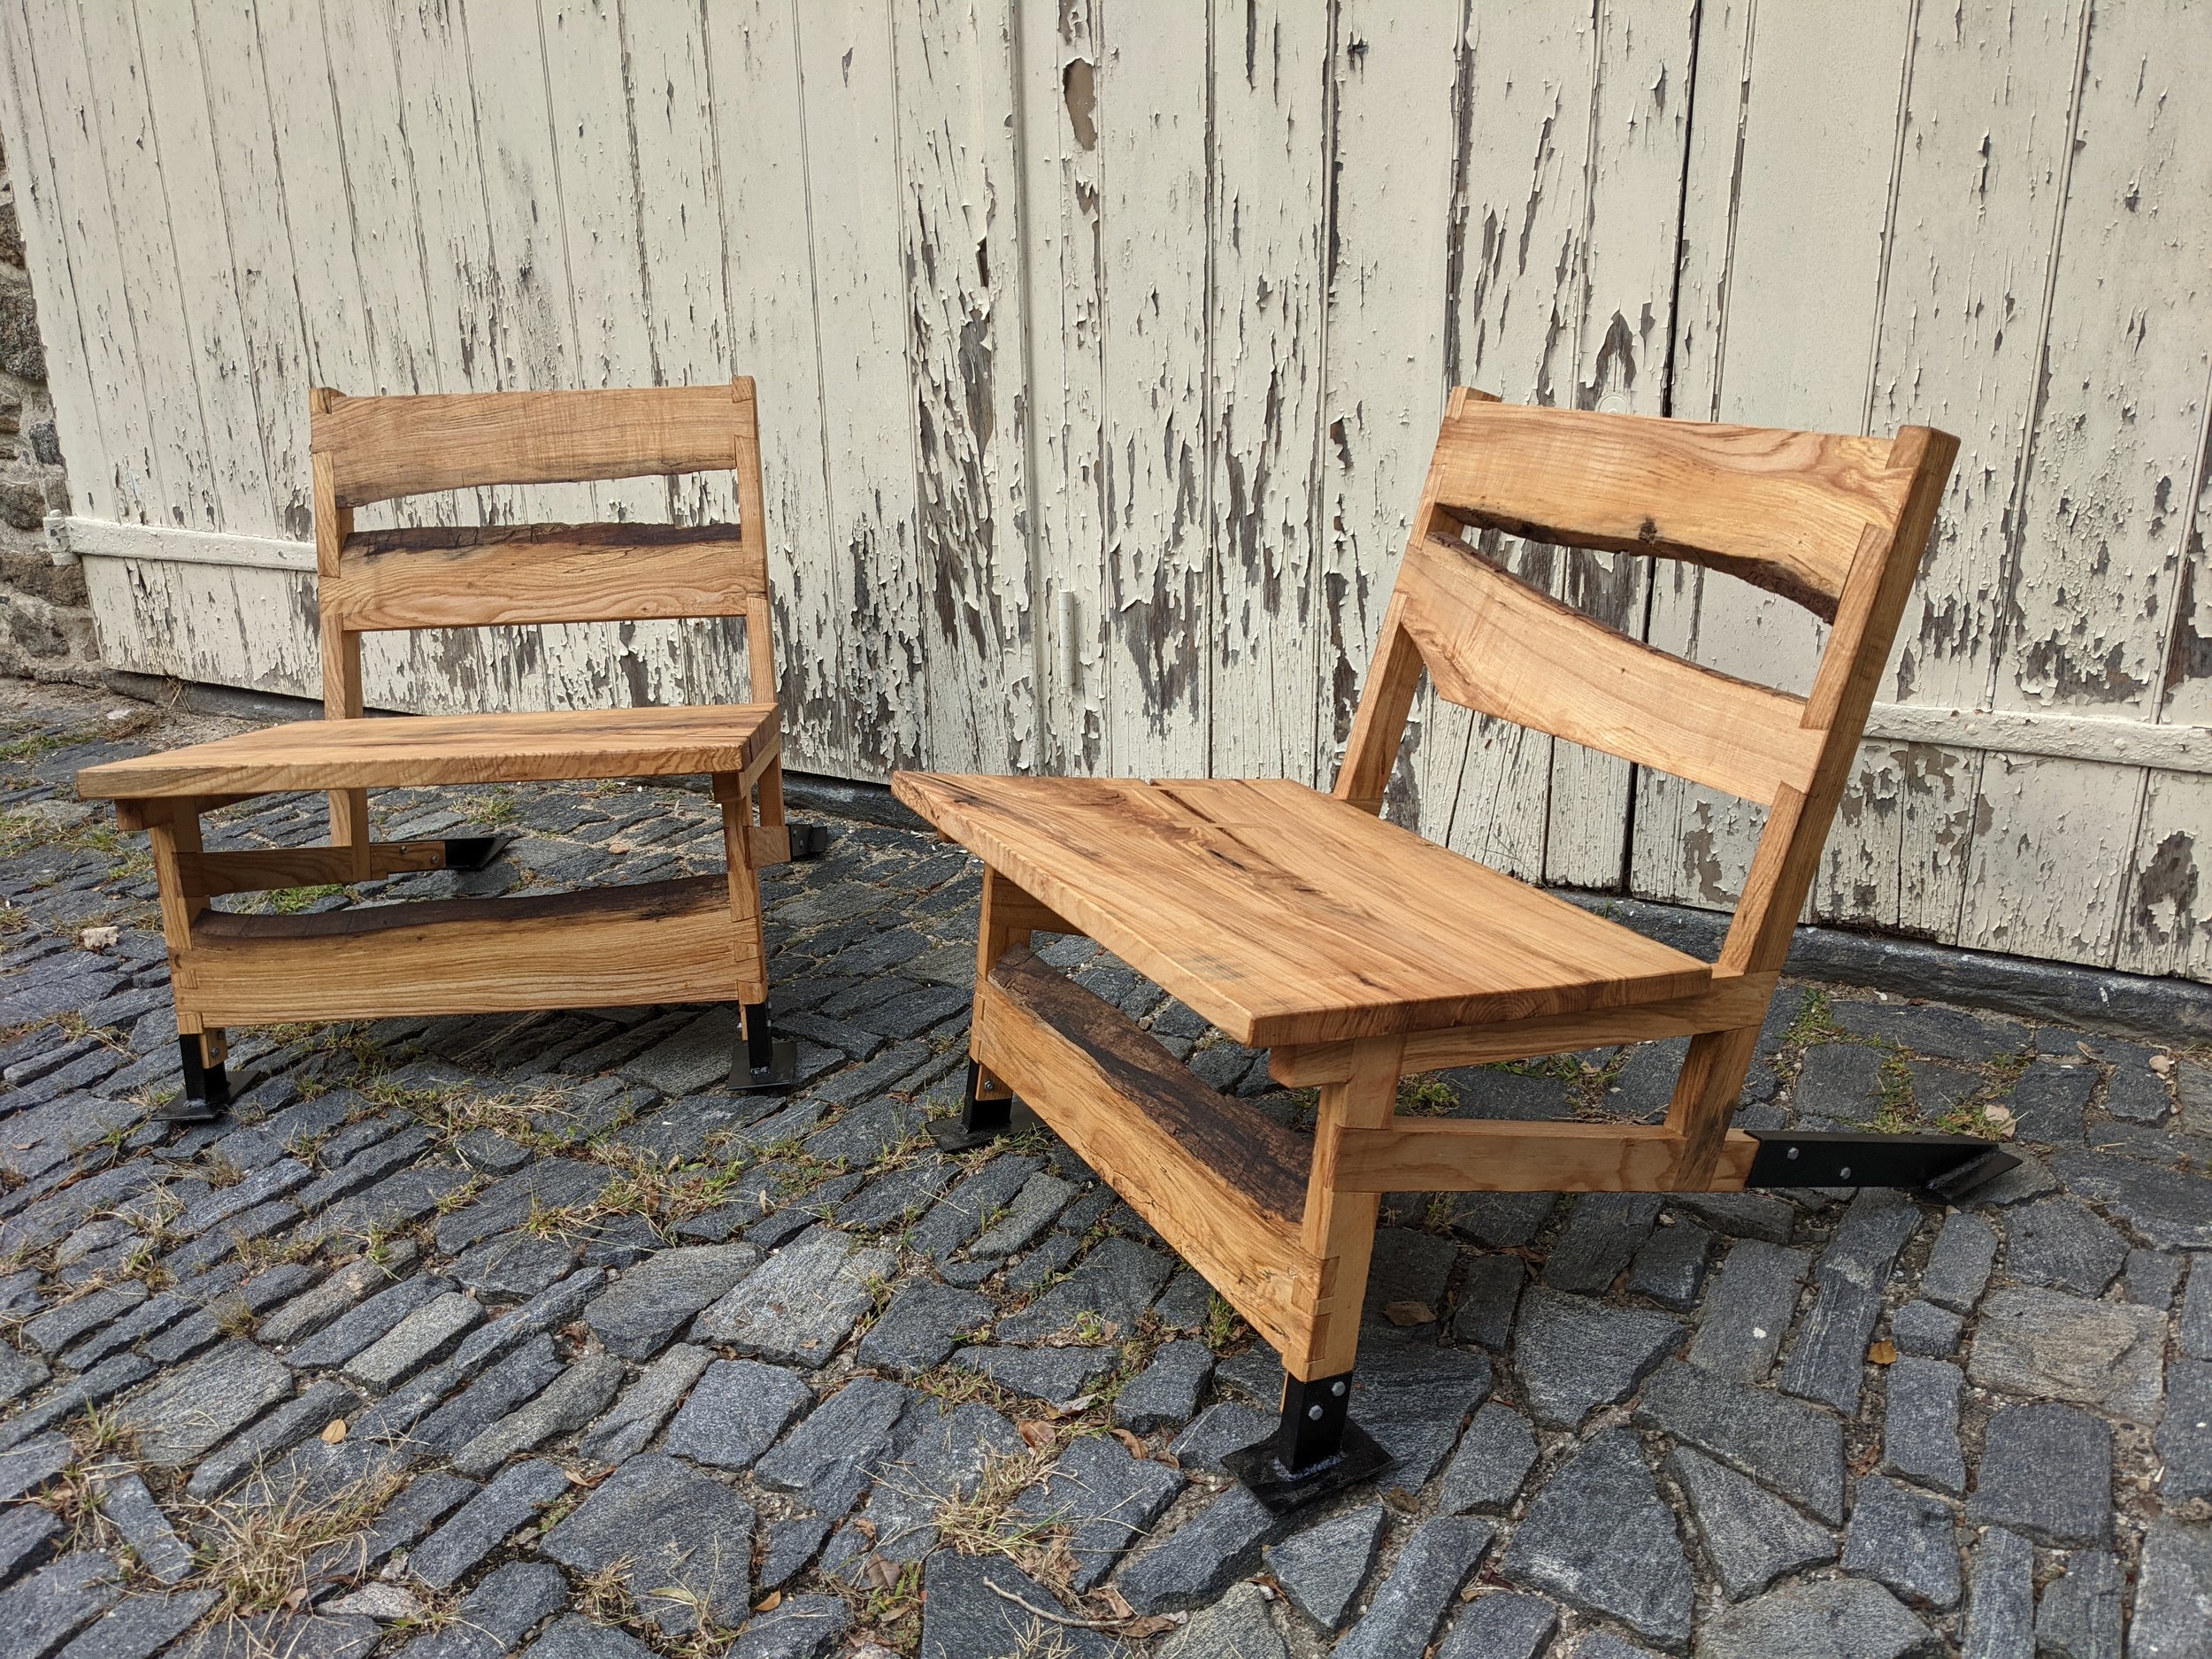  ash outdoor chairs for the Historic Cliveden House in Germantown, Philadelphia 